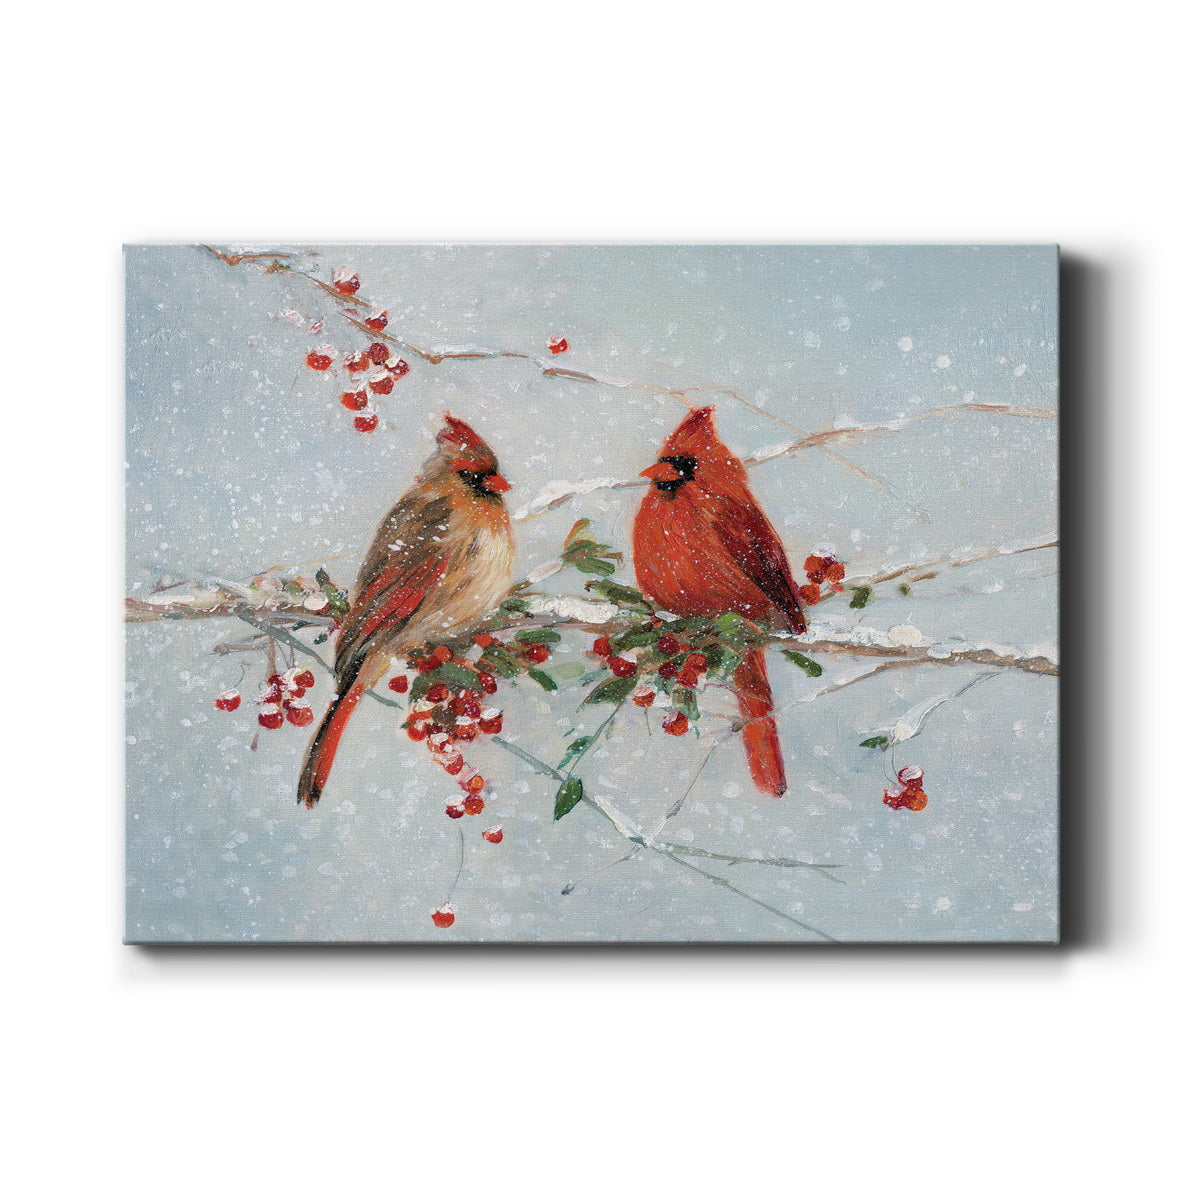 Cardinals in Winter - Premium Gallery Wrapped Canvas  - Ready to Hang